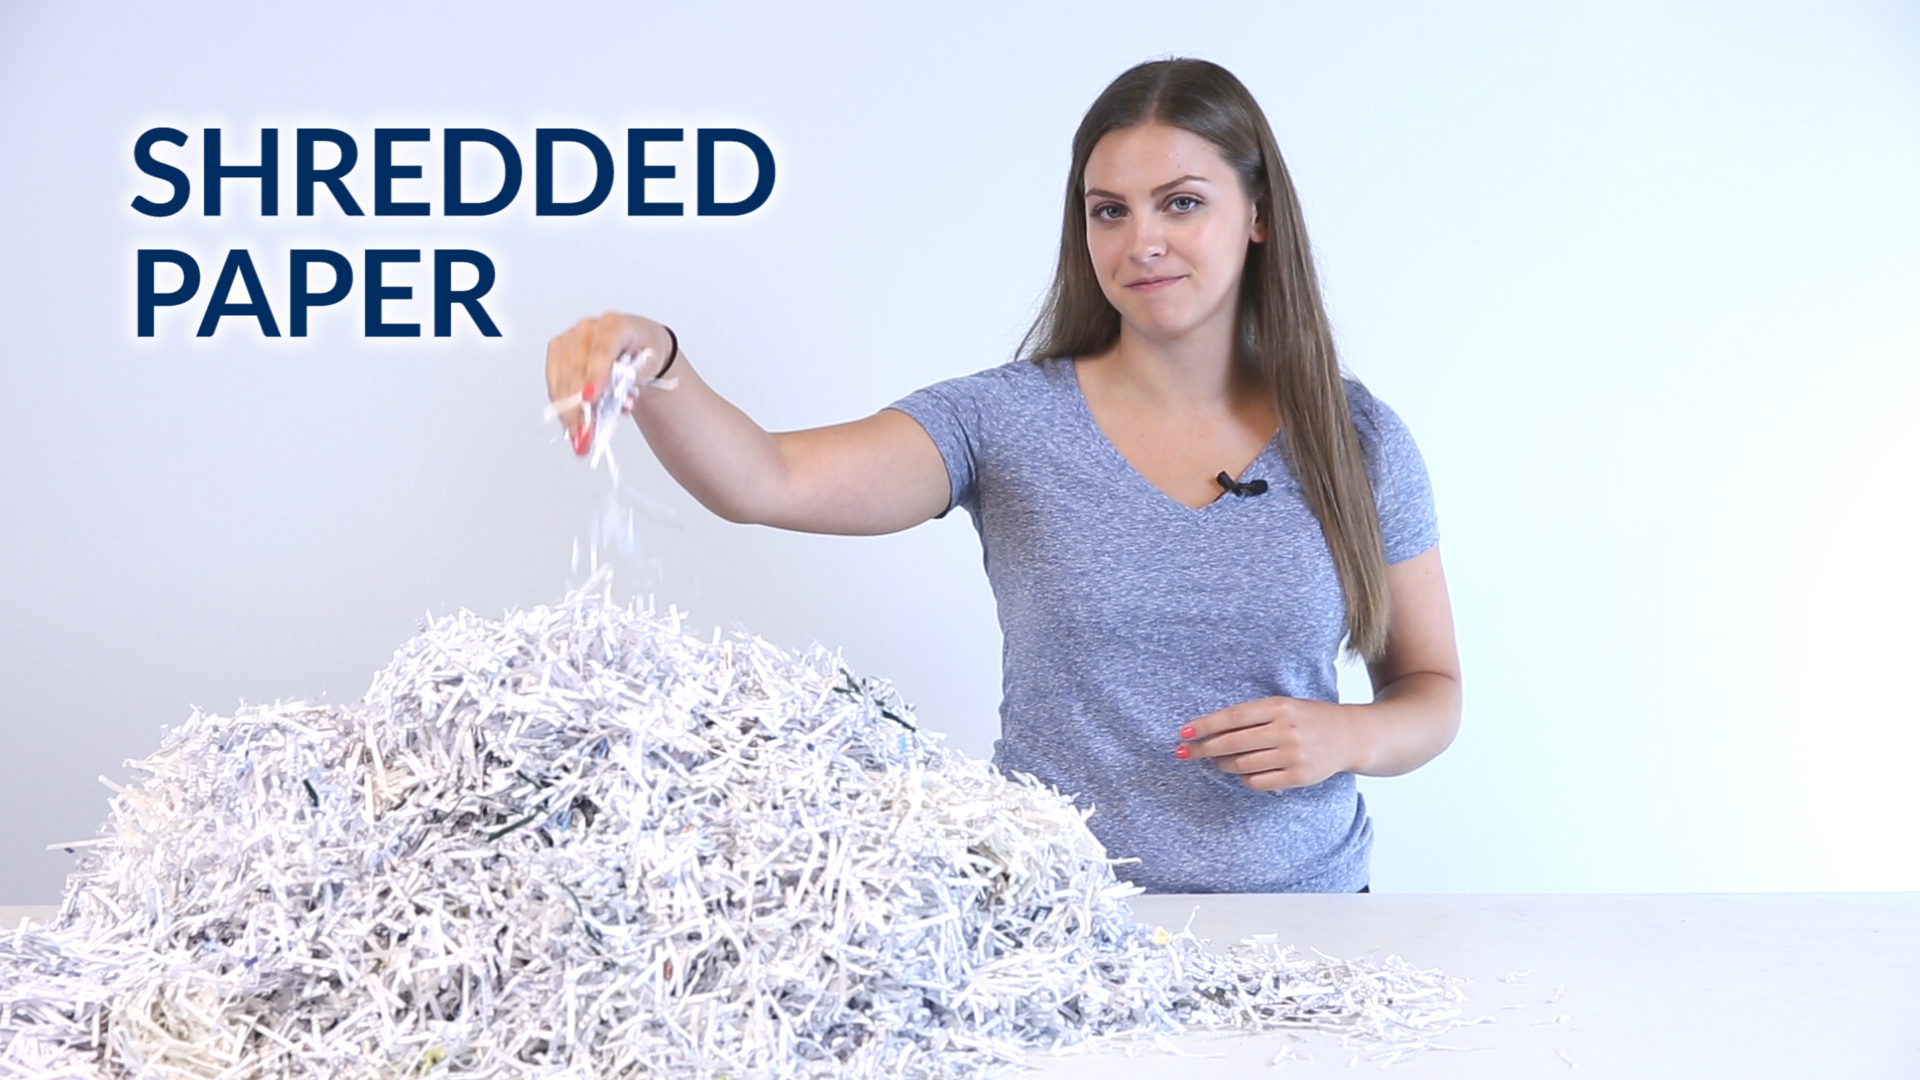 Shredding the Myths about Recycling Shredded Paper